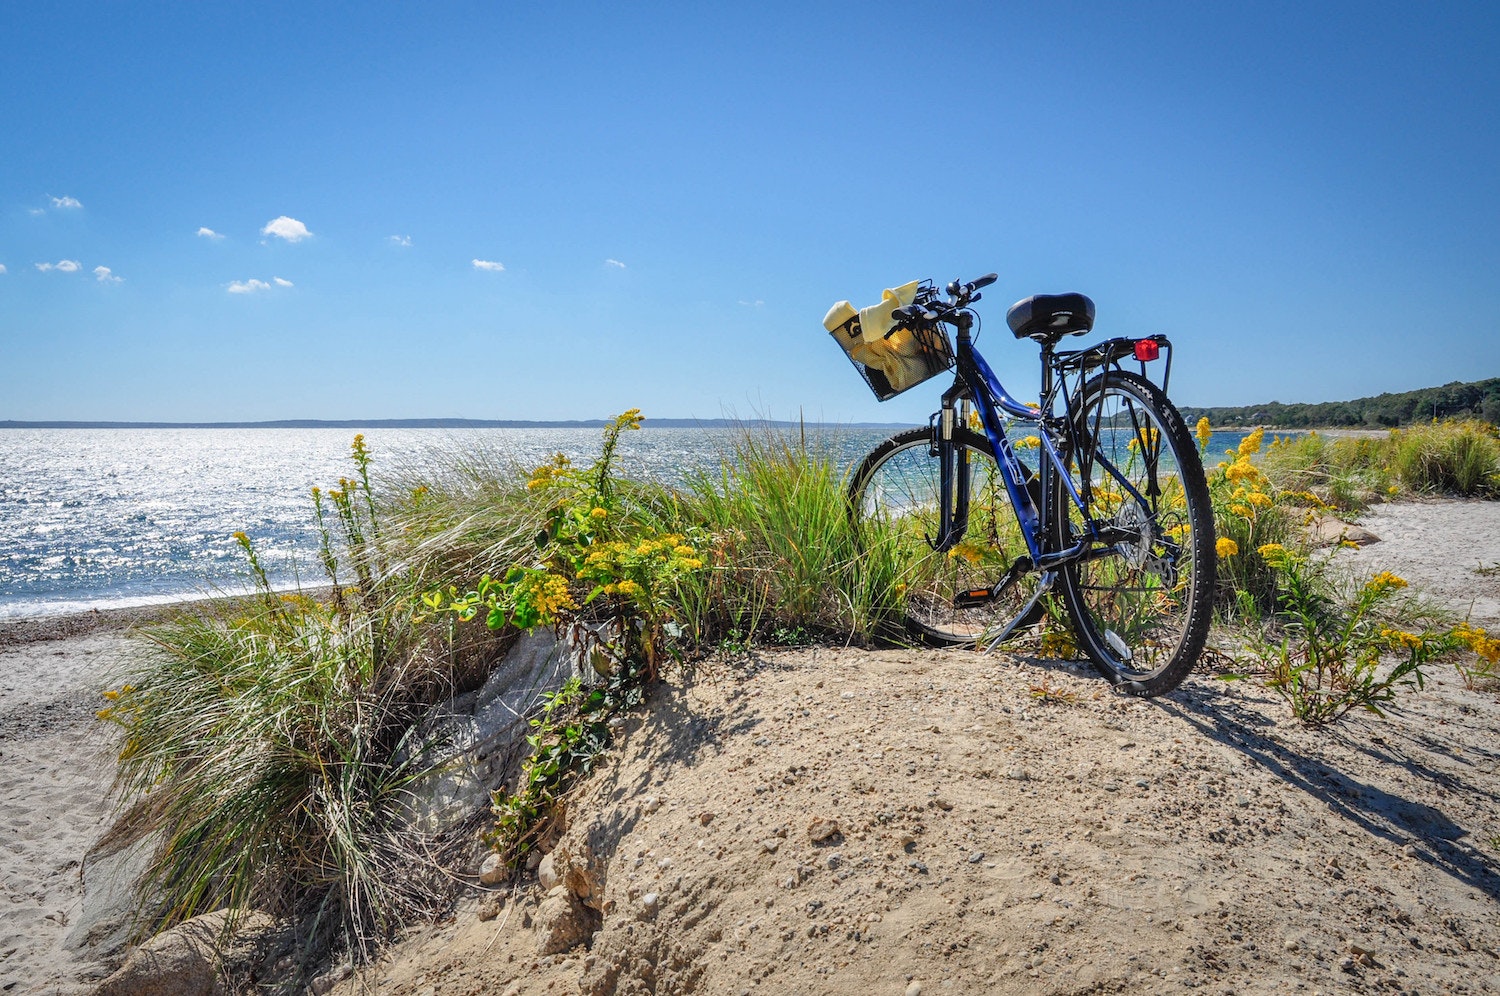 Parked bicycle on a beachside bike path at Cape Cod